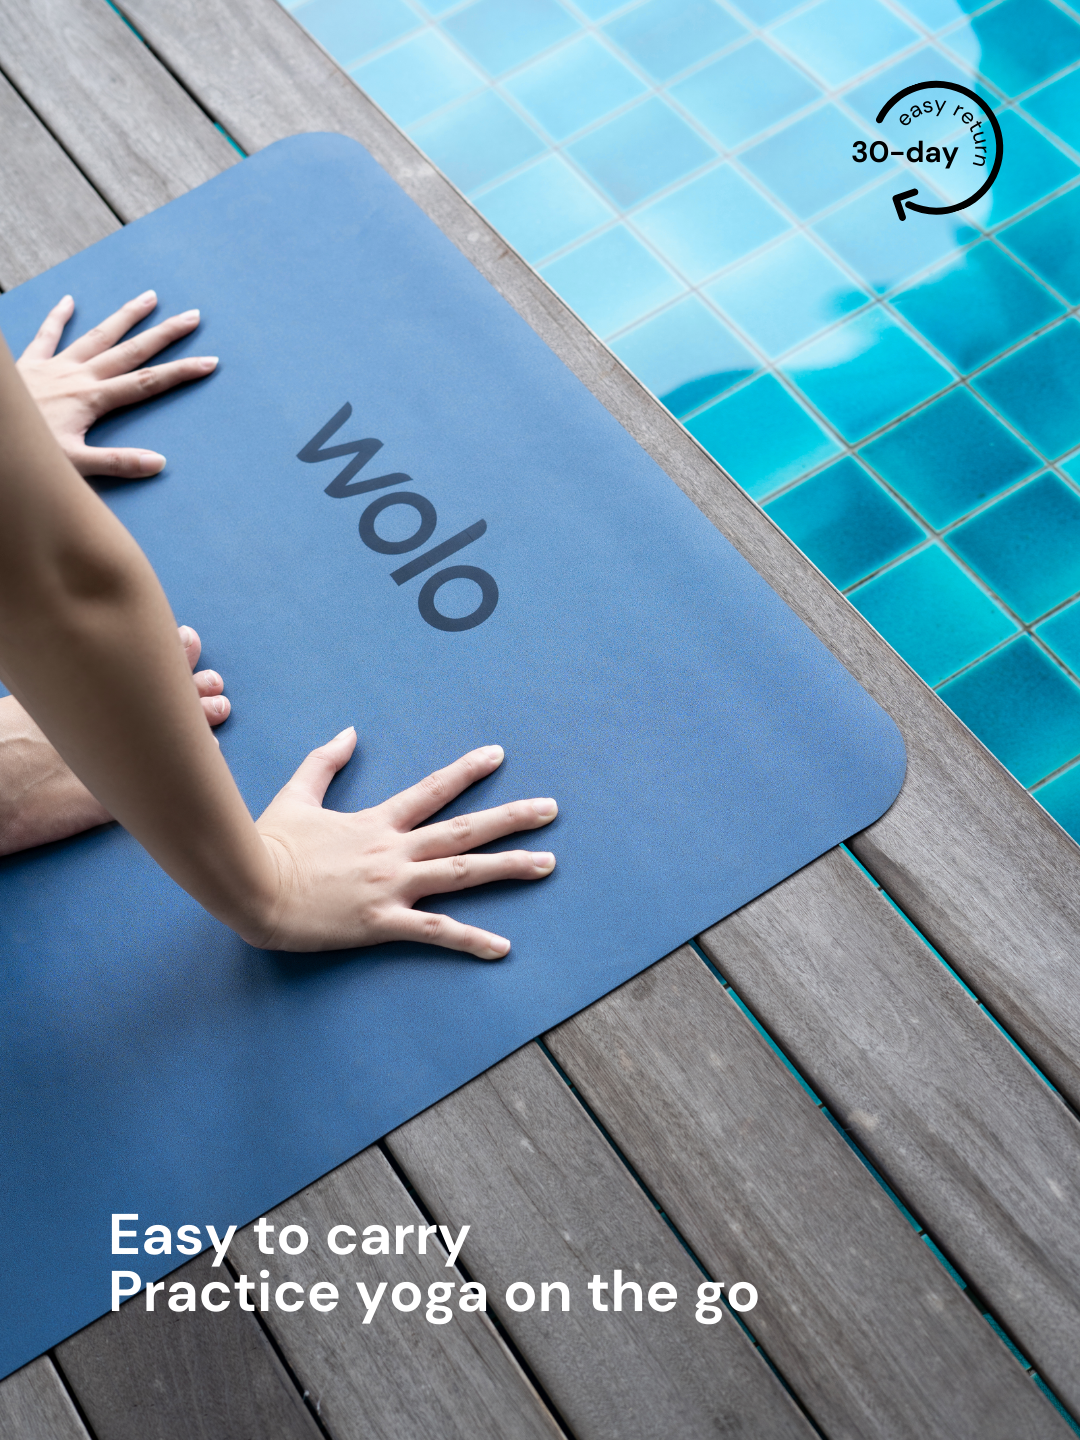 Easy to carry Ocean blue foldable travel yoga mat